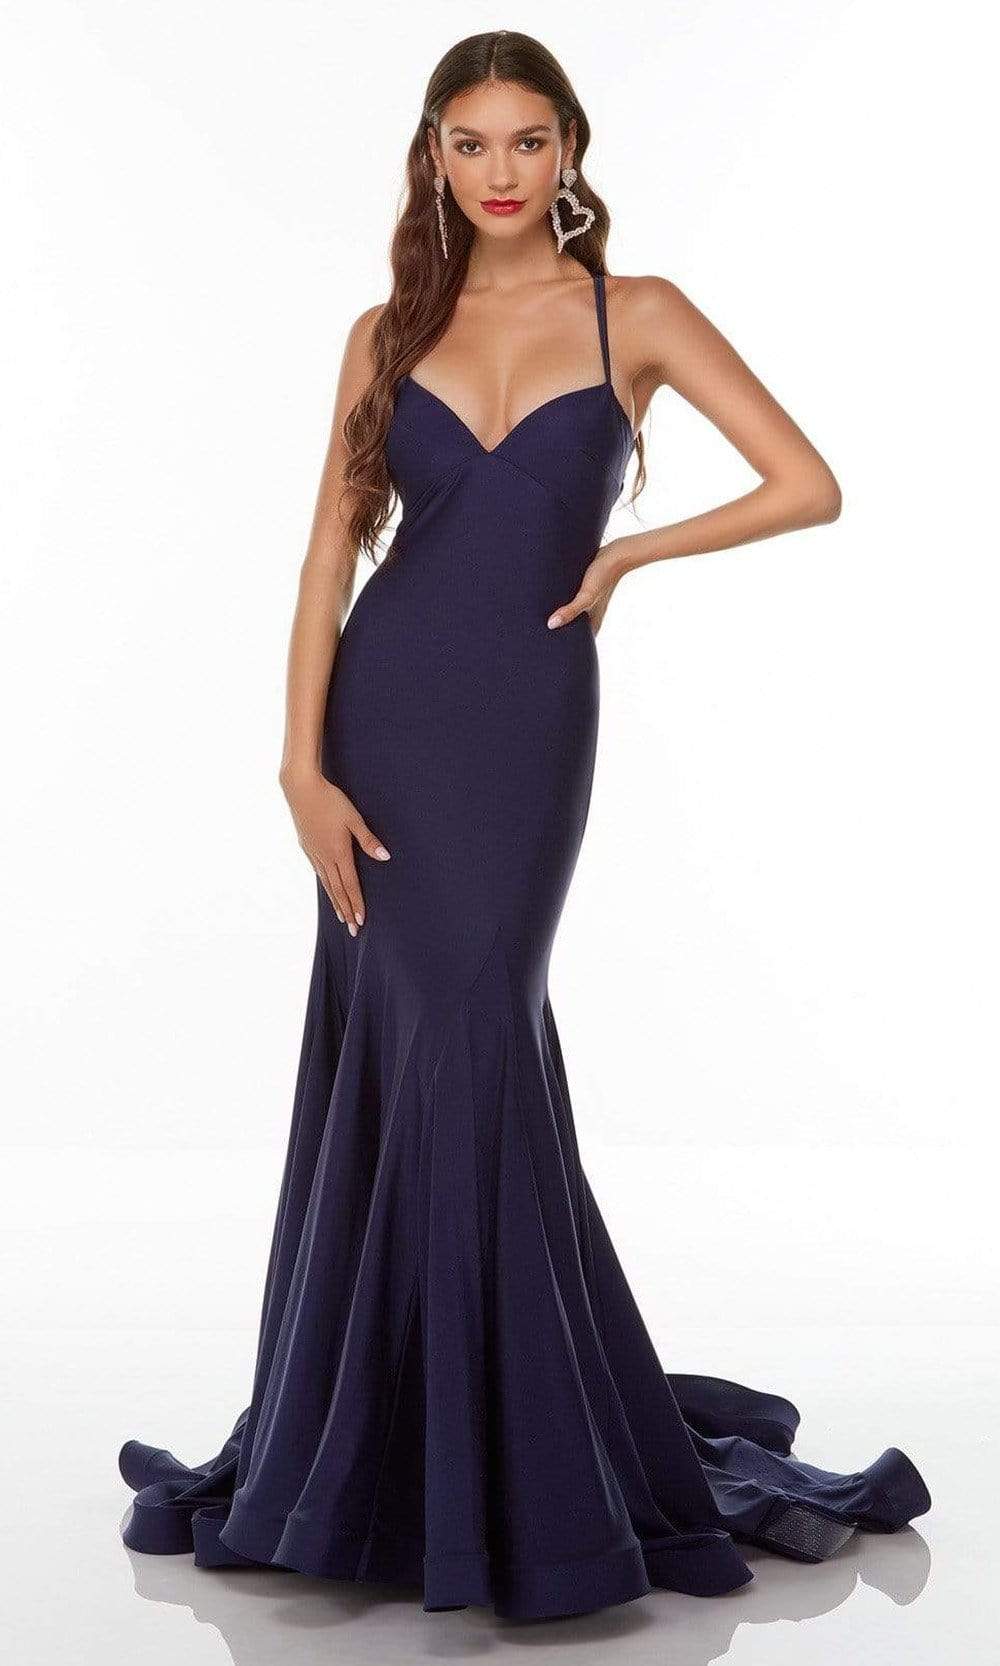 Alyce Paris - 61165 Sleeveless Fit And Flare Gown Prom Dresses 000 / Navy